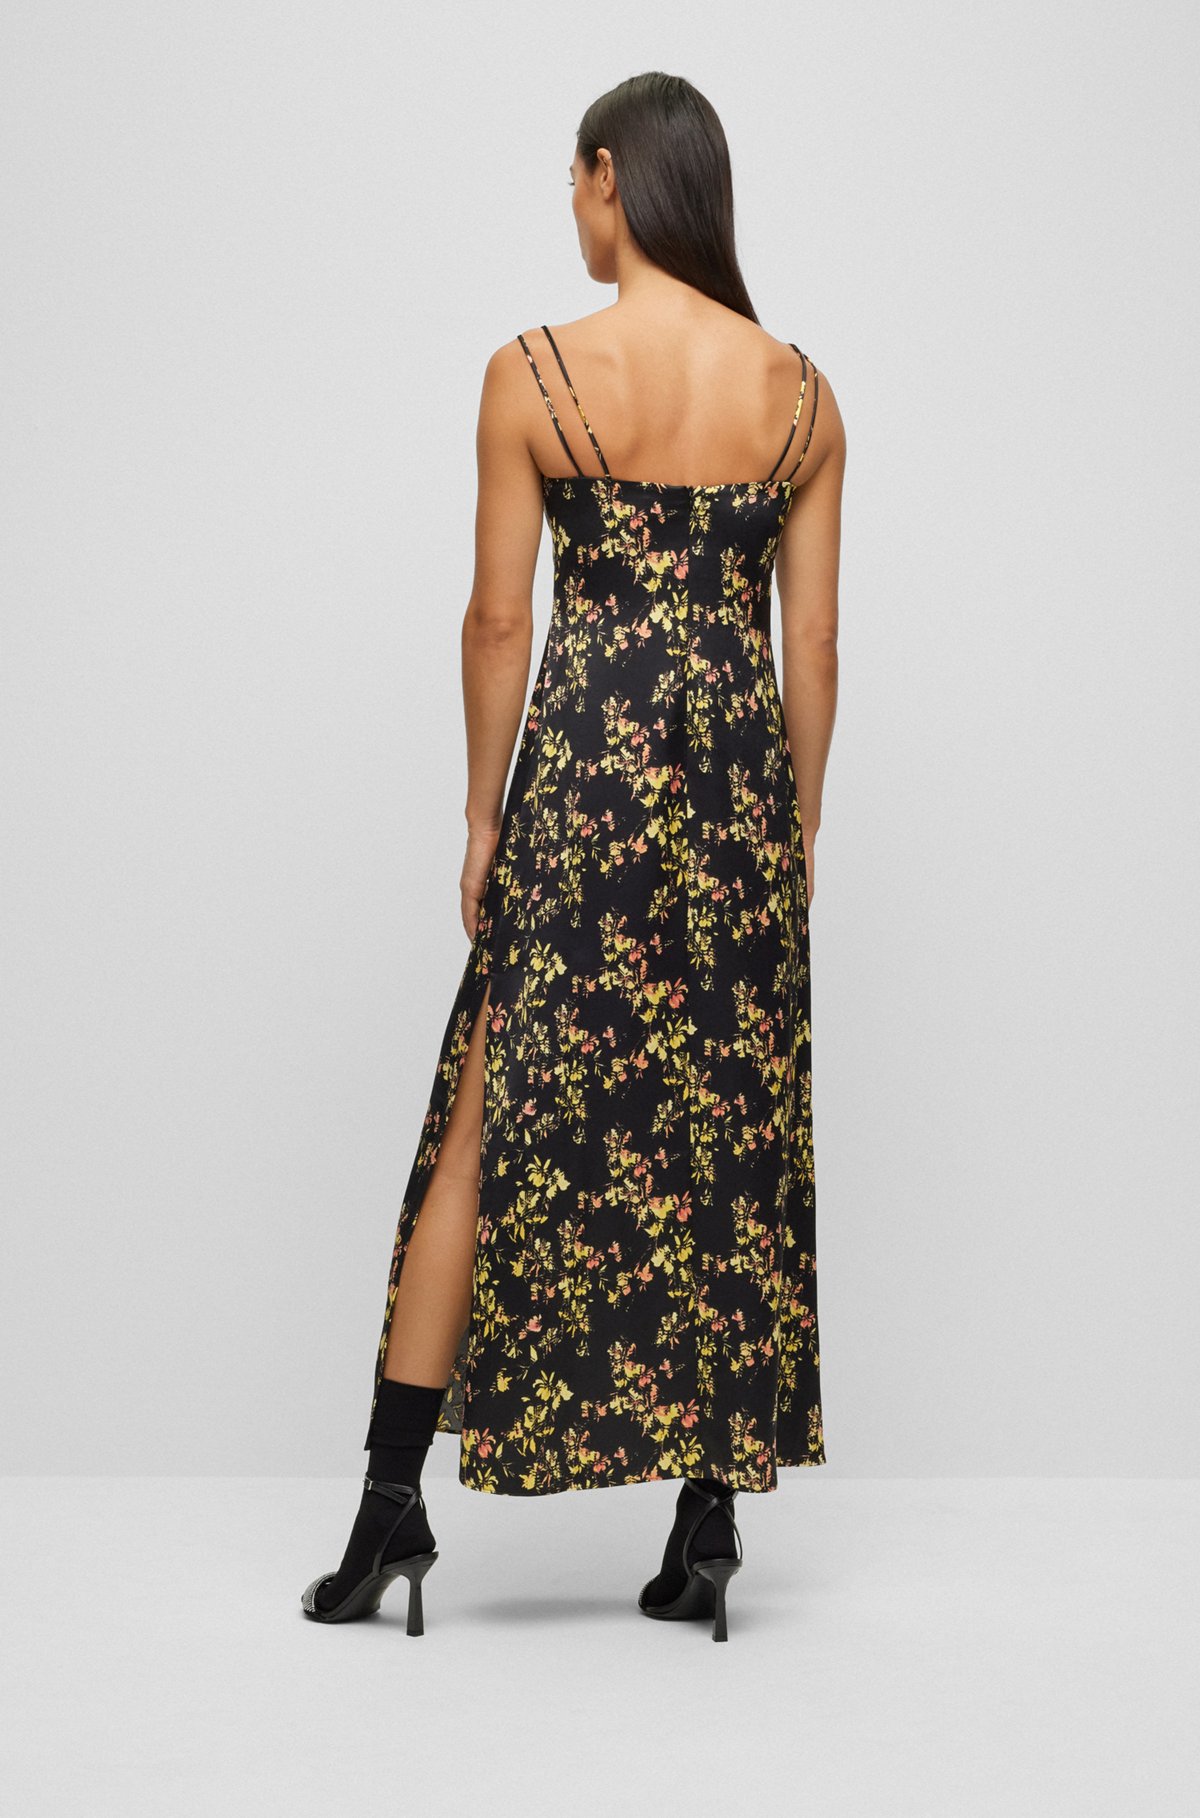 Floral-print sleeveless dress with lace detail, Patterned